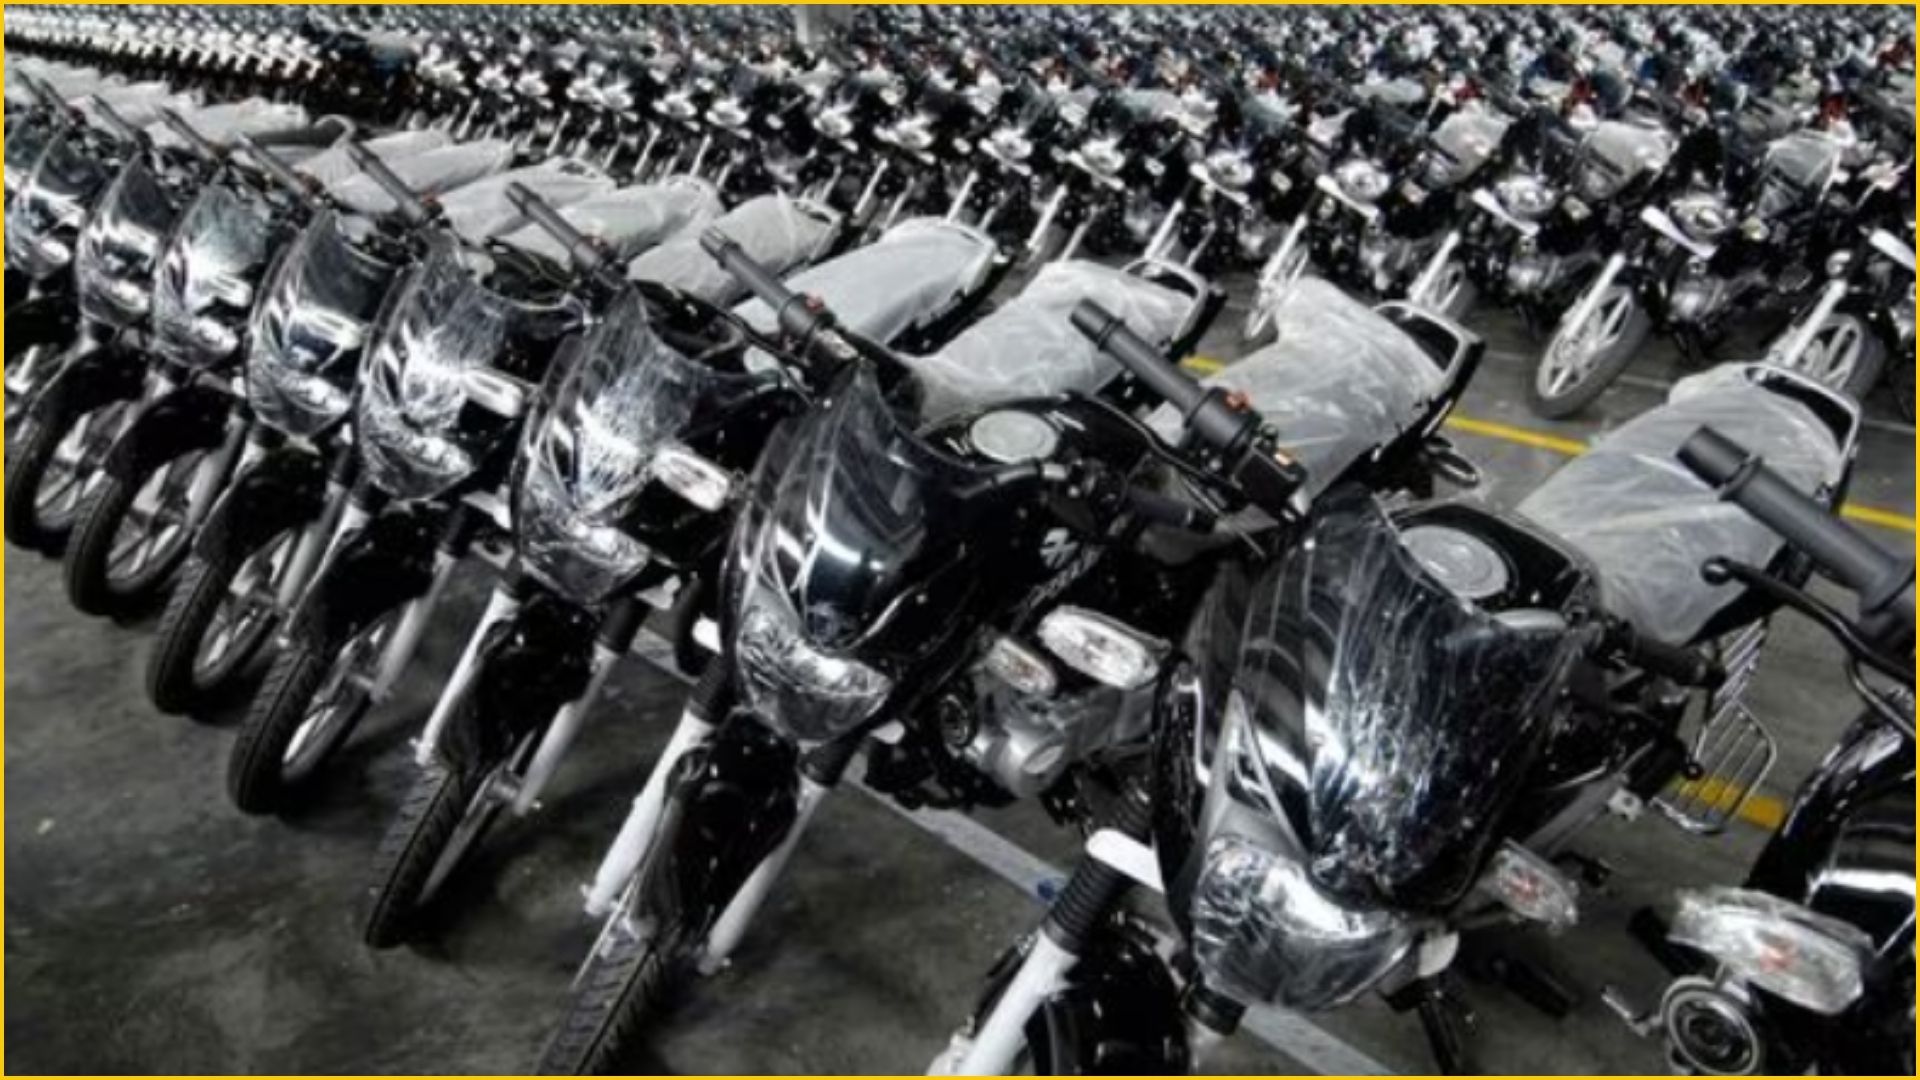 Bajaj Auto approves Rs 4,000-crore share buyback at Rs 10,000 per share.